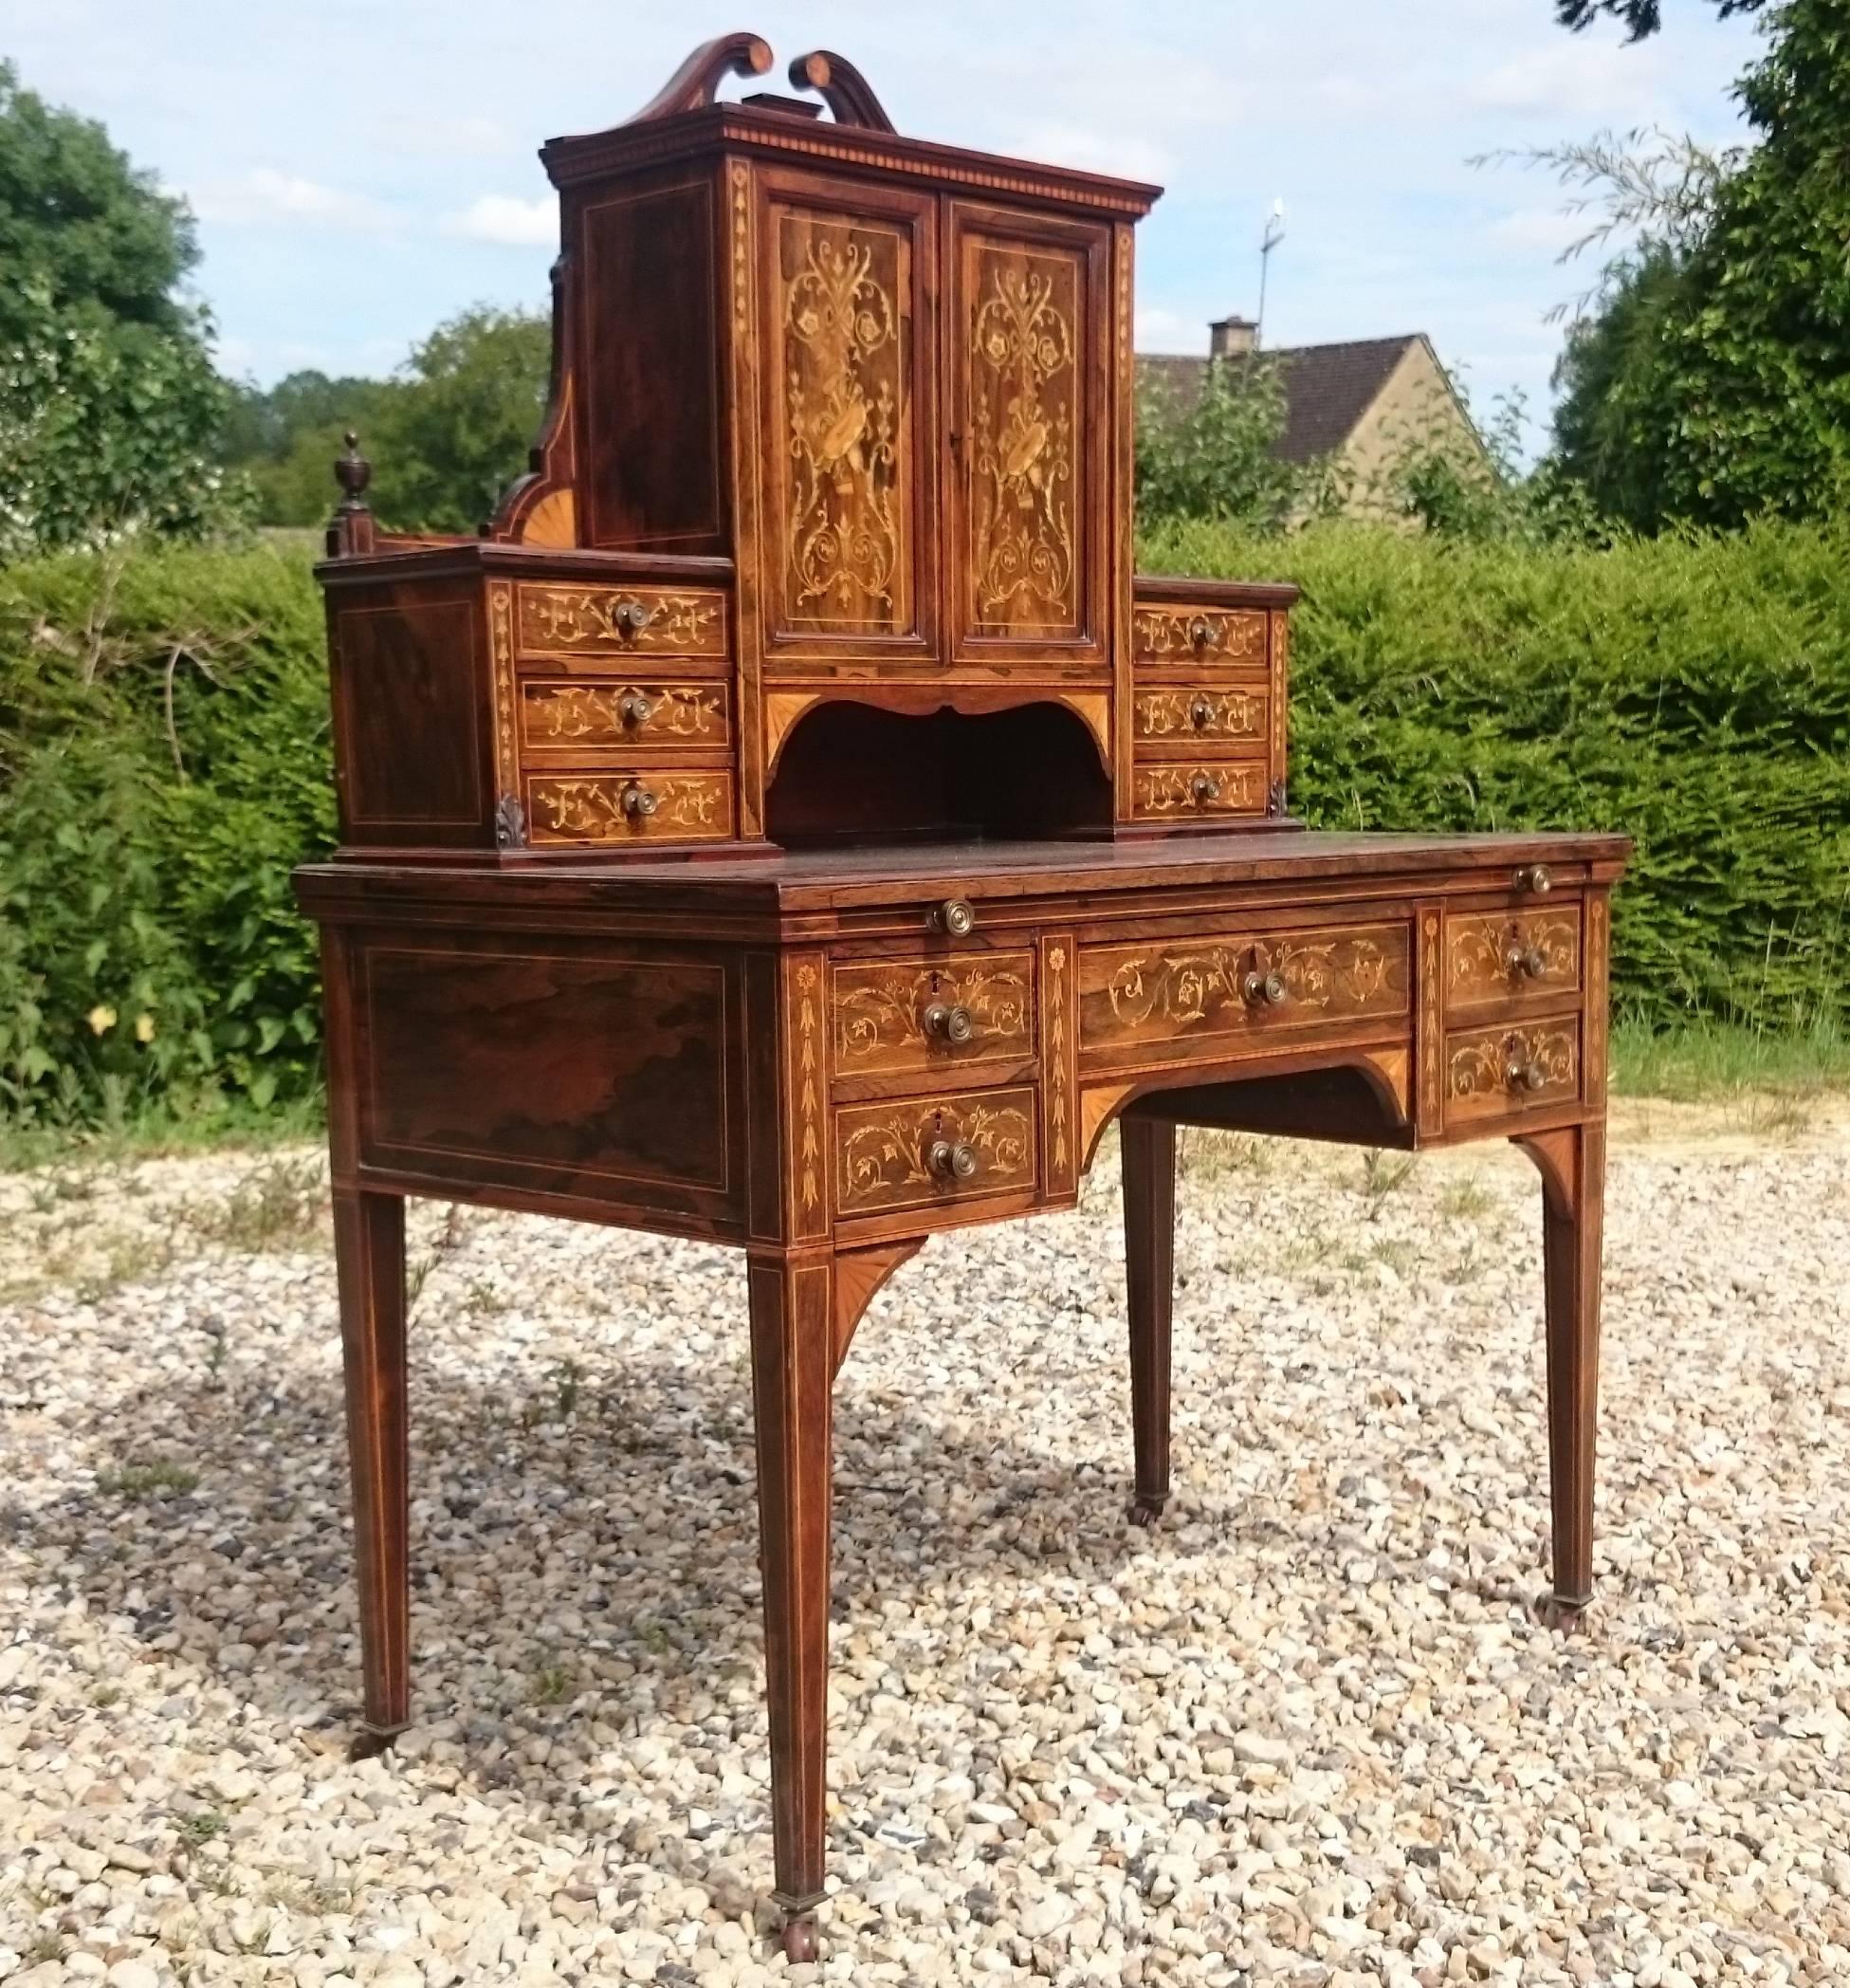 Early 20th century antique secretaire cabinet standing on square taper legs. This secretaire is a very fine example of this period of cabinet making. It is covered with finely inlaid boxwood decoration and the drawer linings are made from a good cut